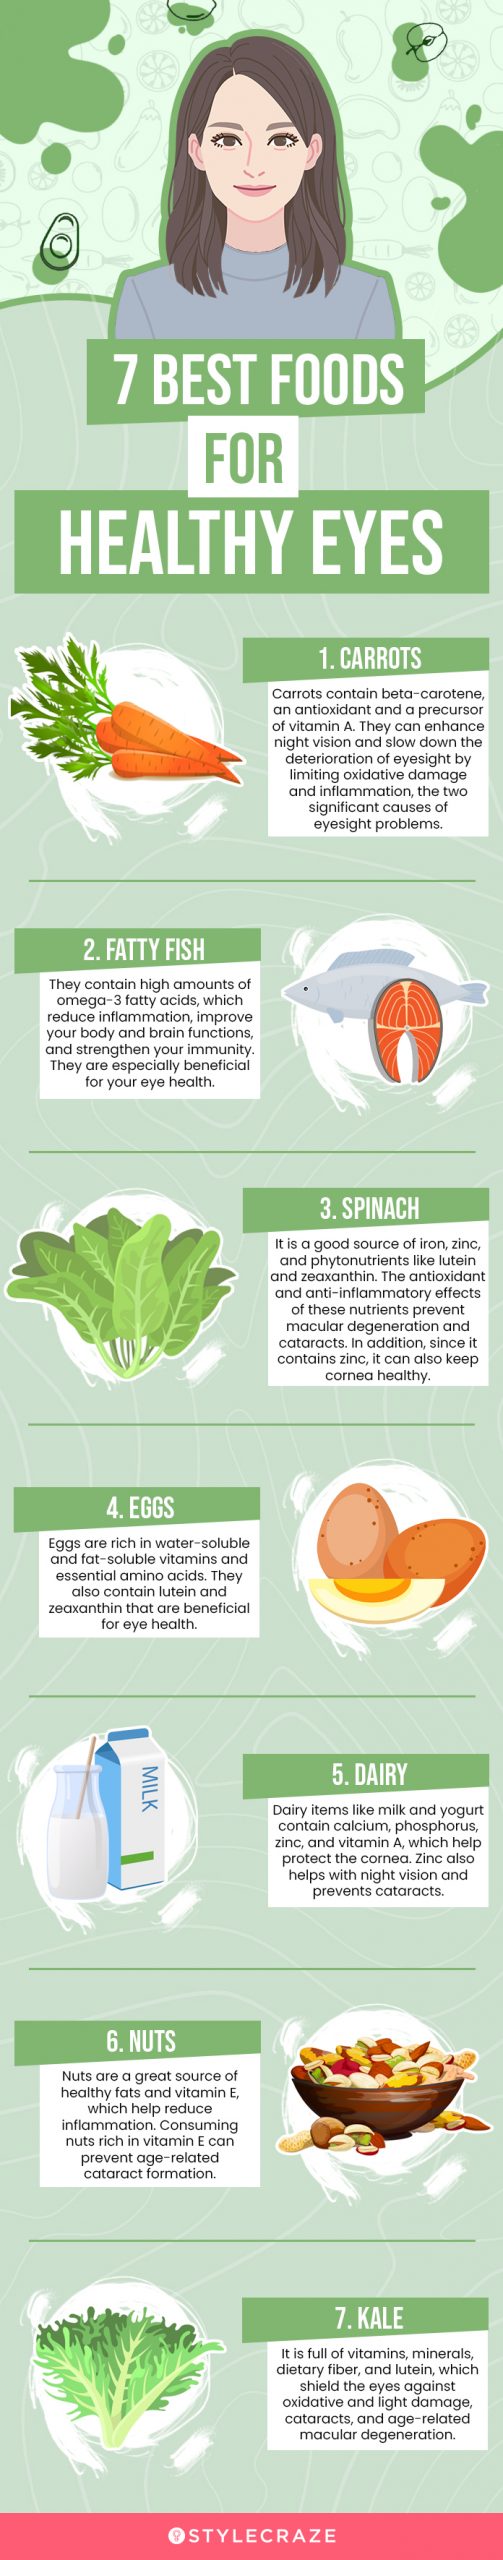 7 best foods for healthy eyes (infographic)